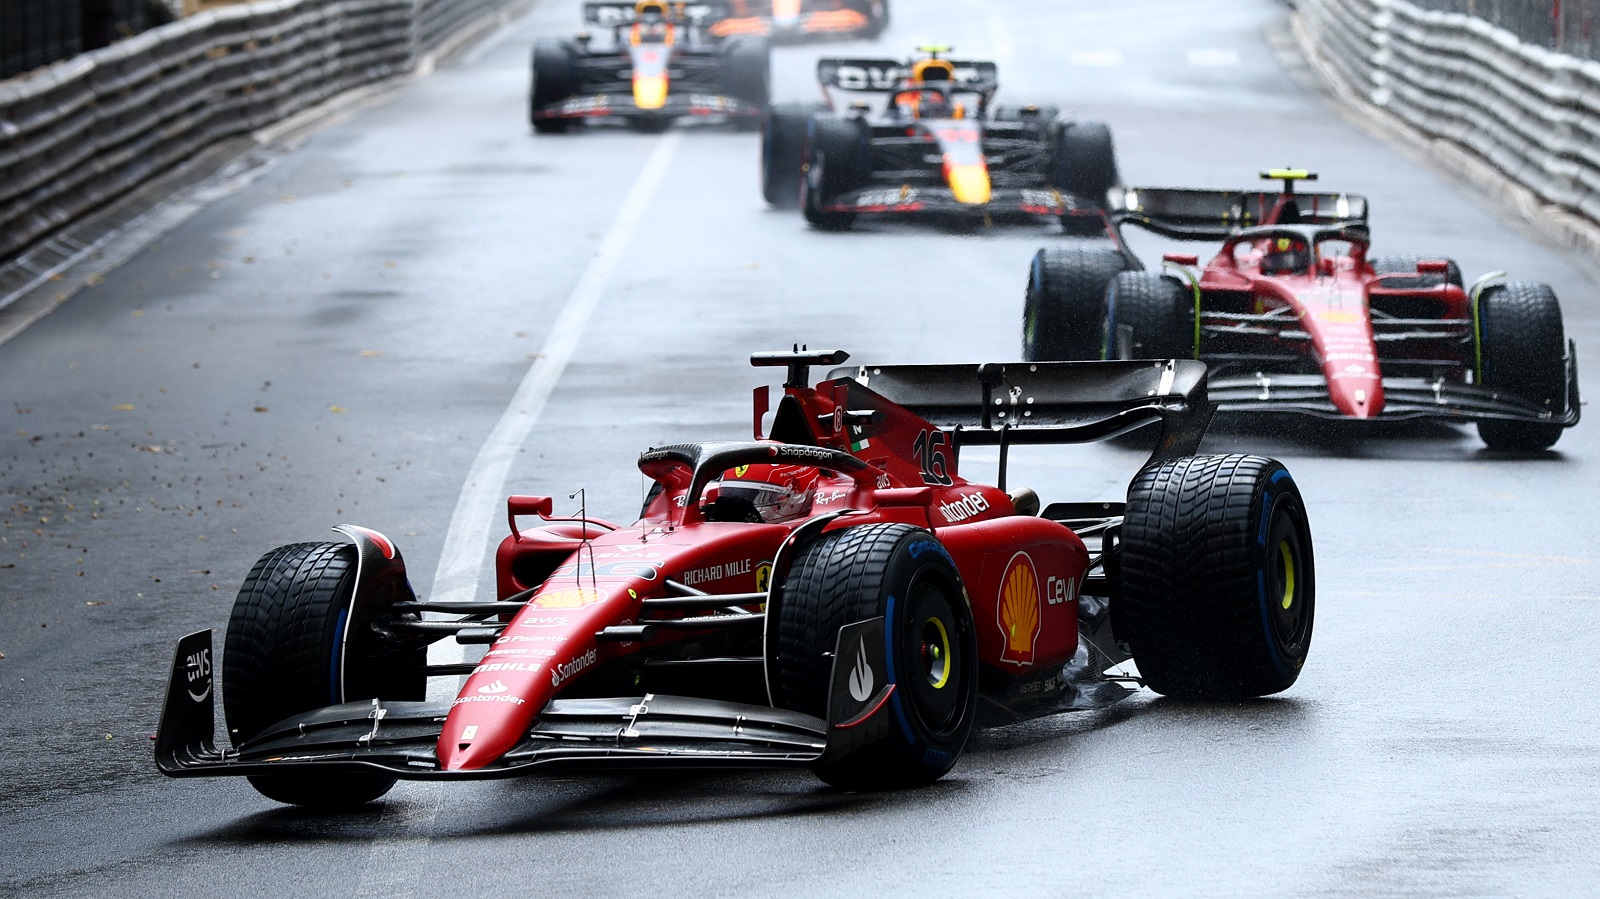 Charles Leclerc leads Carlos Sainz during the Formula 1 Grand Prix of Monaco at Circuit de Monaco on May 29, 2022. | Clive Rose/Getty Images